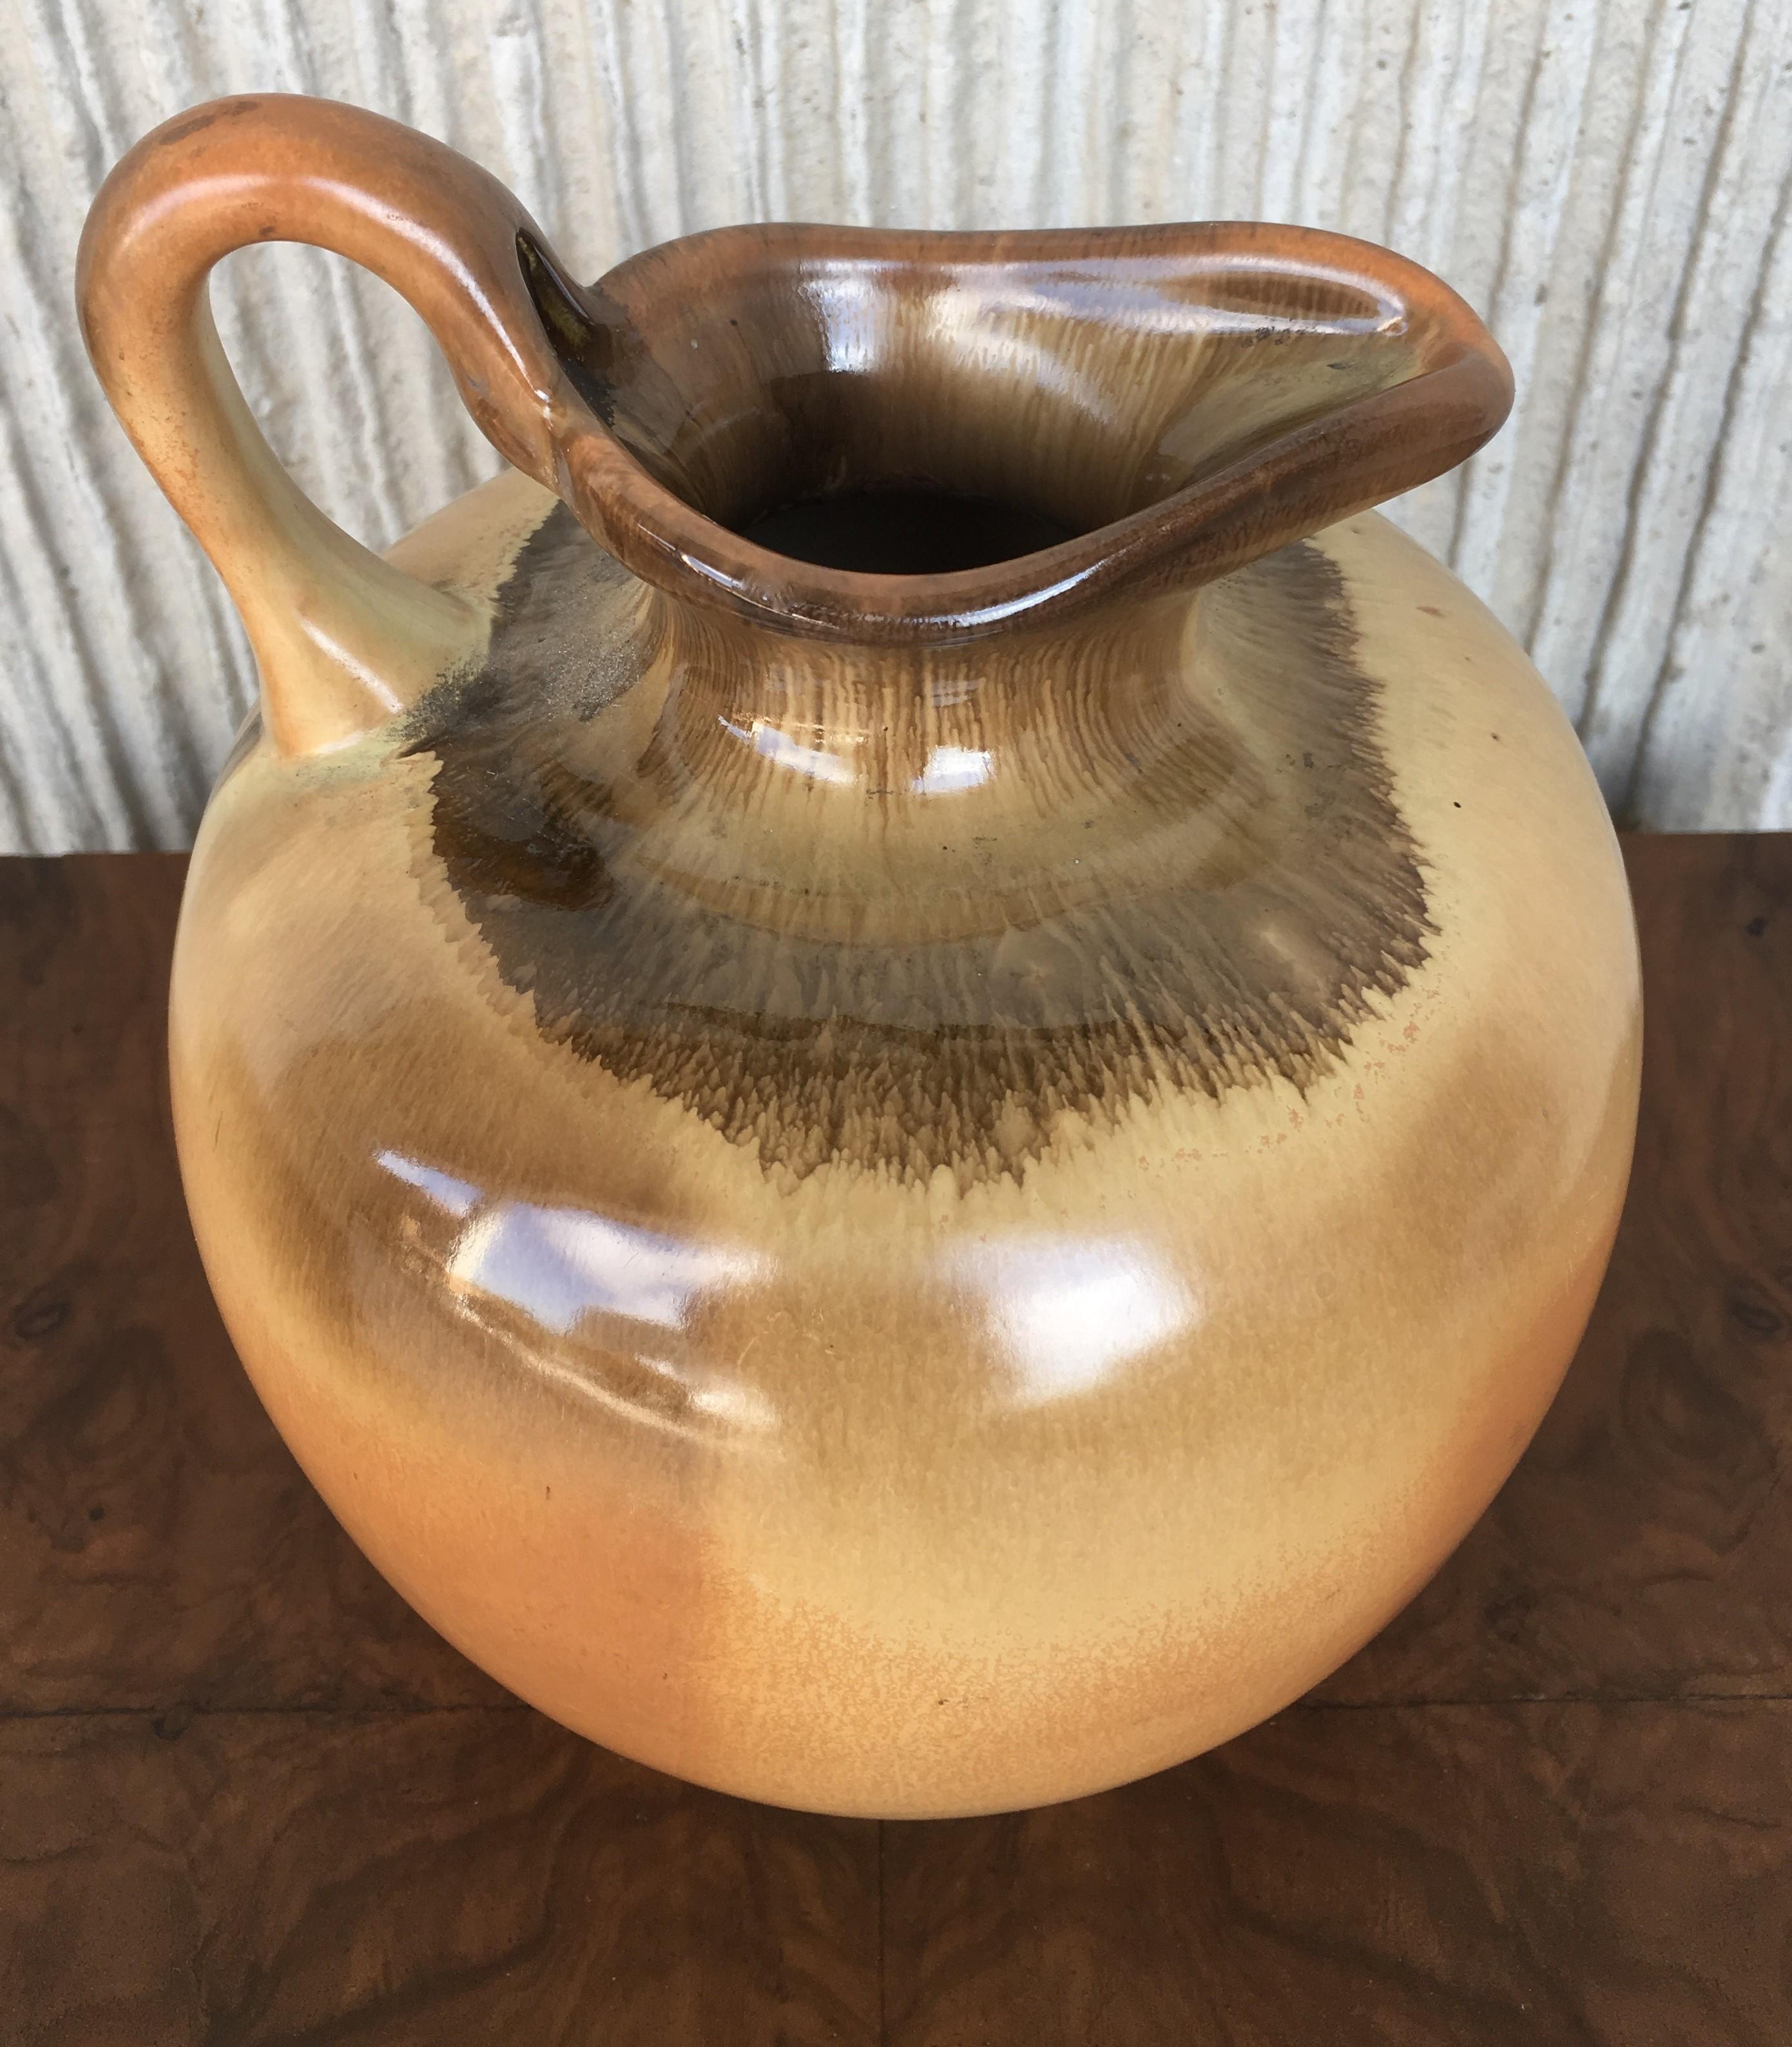 19th century Spanish glazed terracotta jug, pot or pitcher with handle.